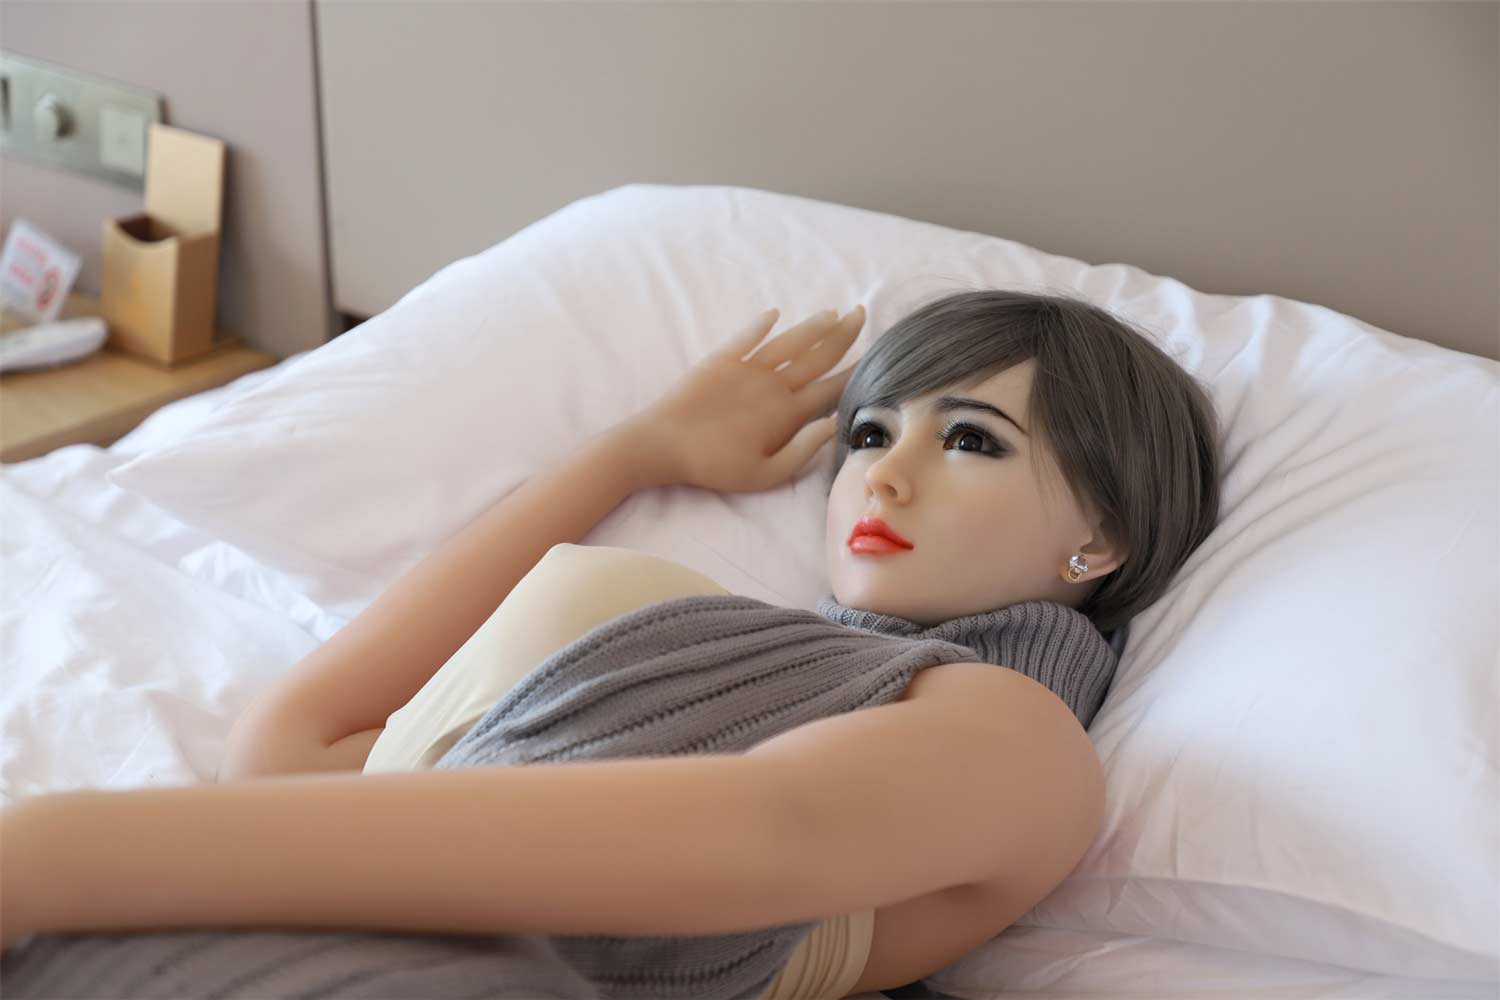 Silicone sex doll with hands on pillows